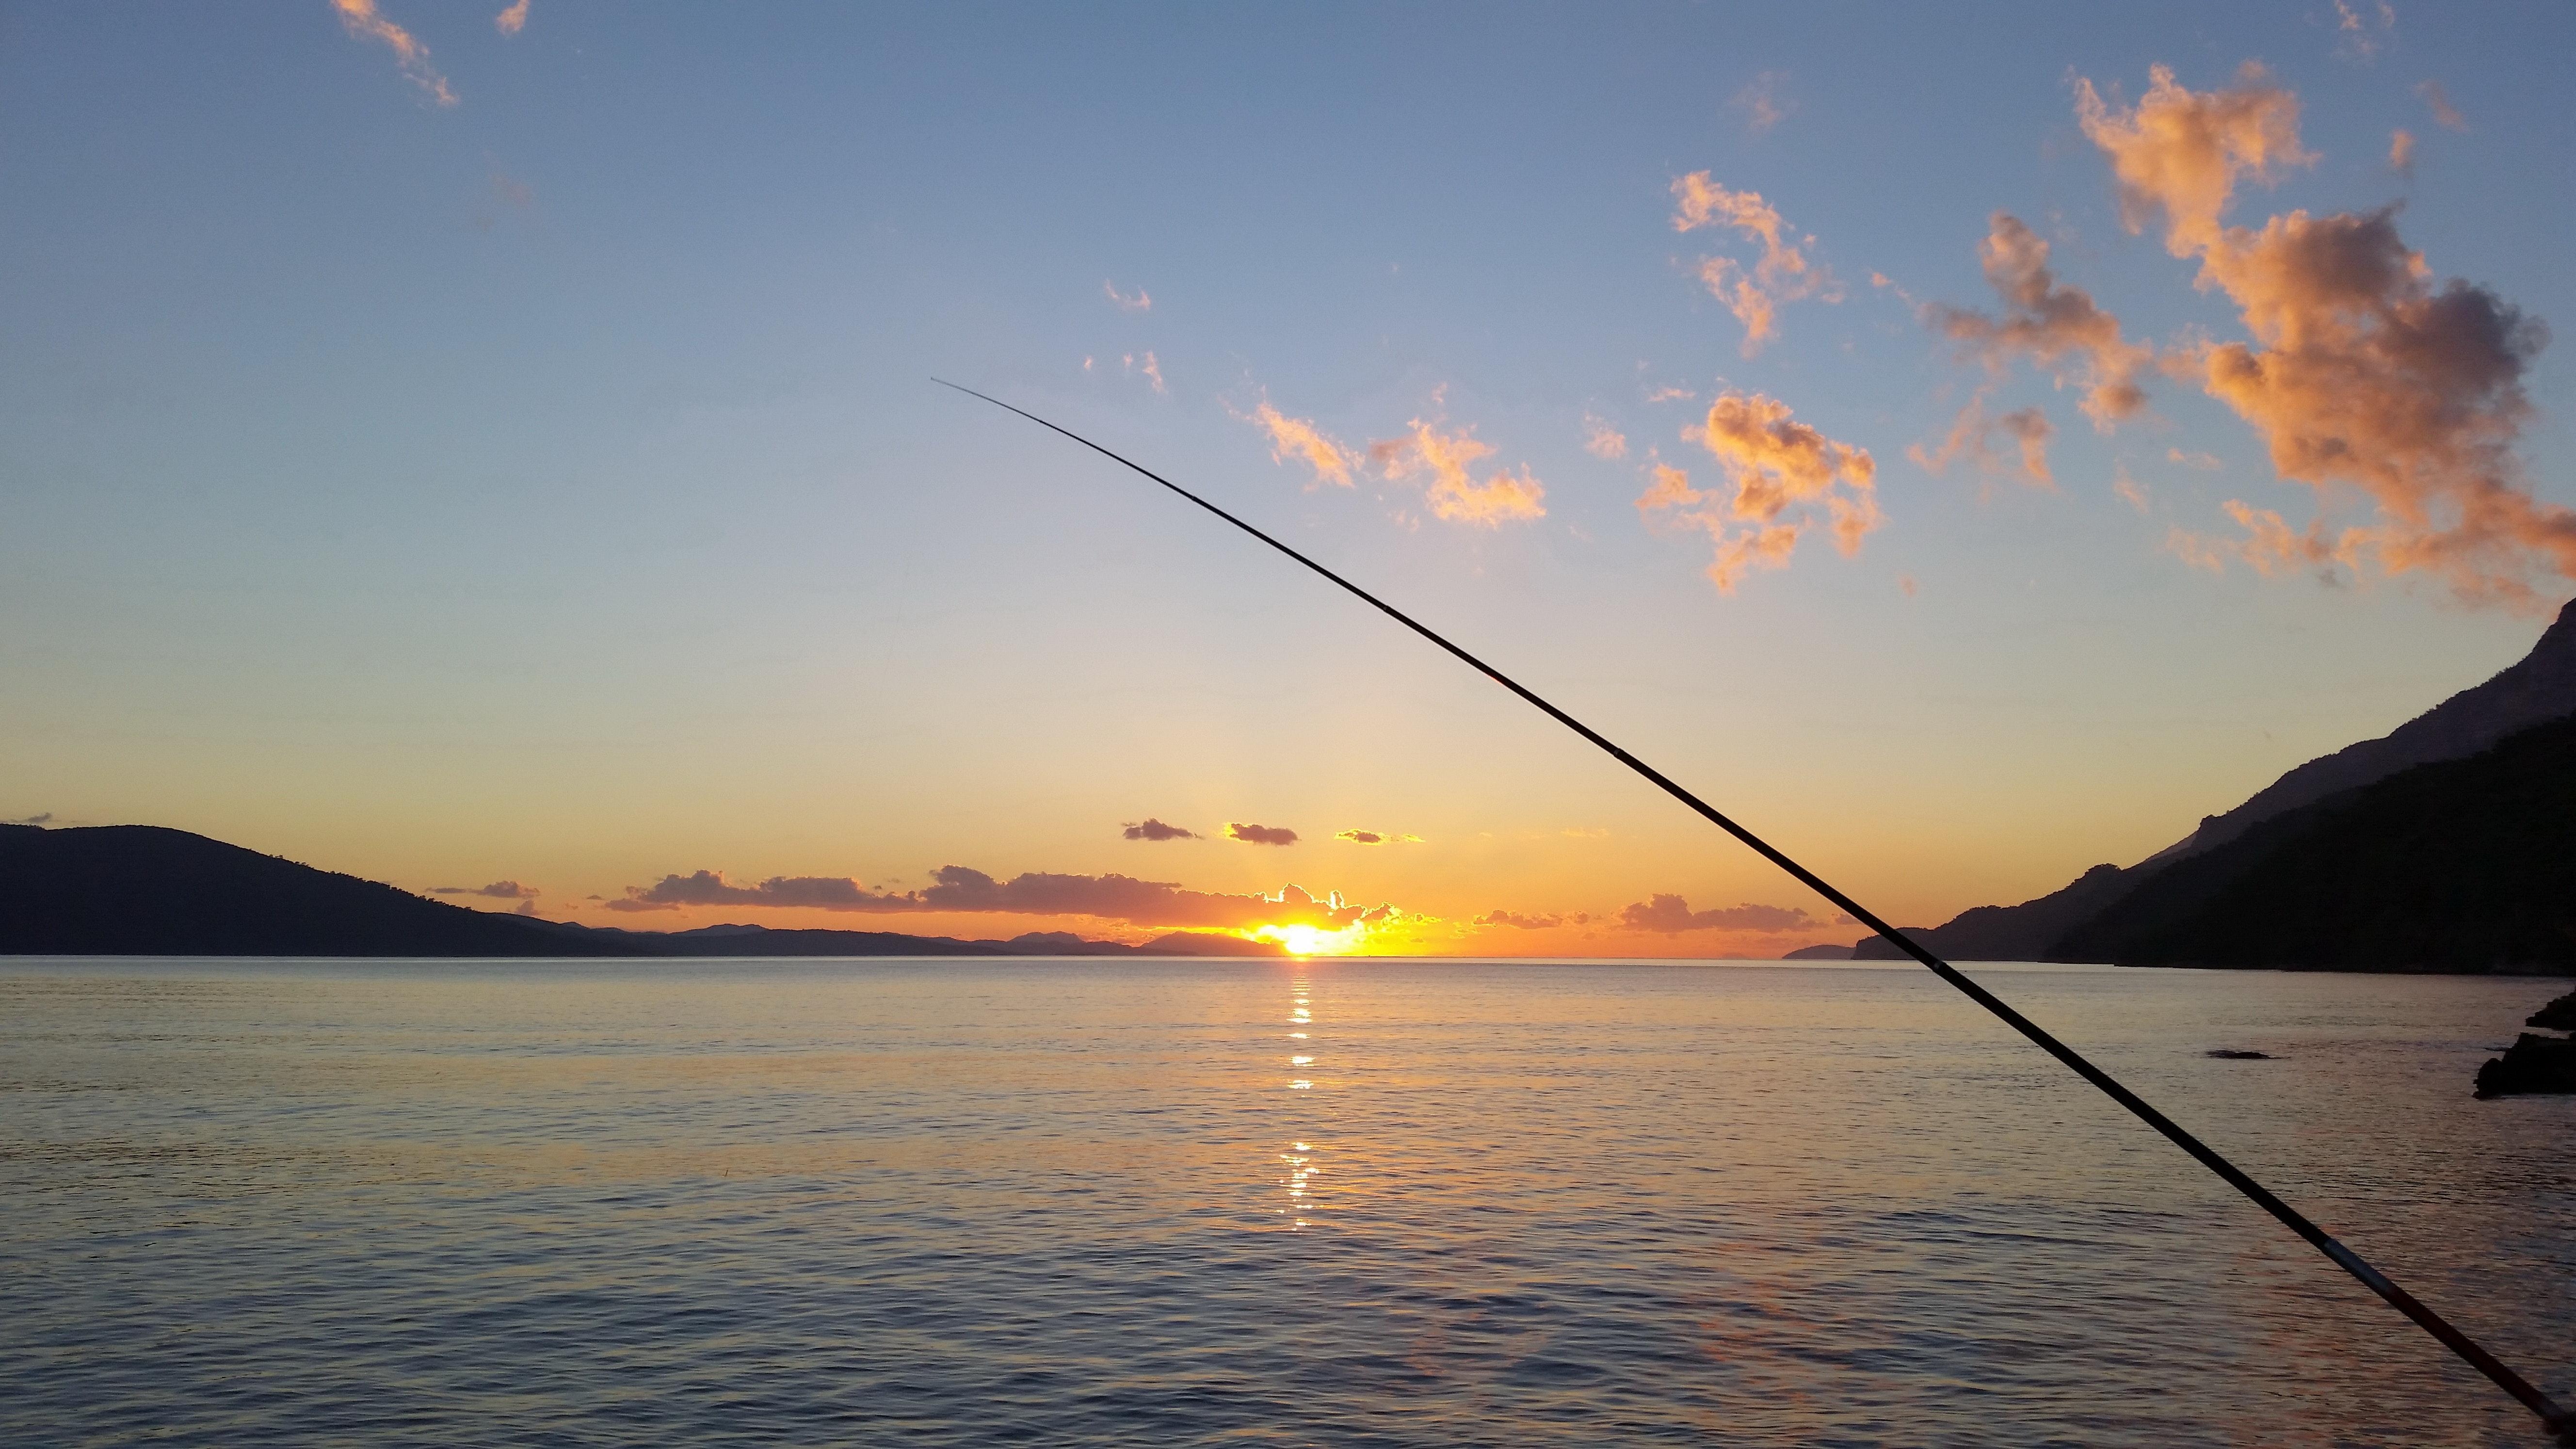 Fishing Rod Near Body of Water during Sunset · Free